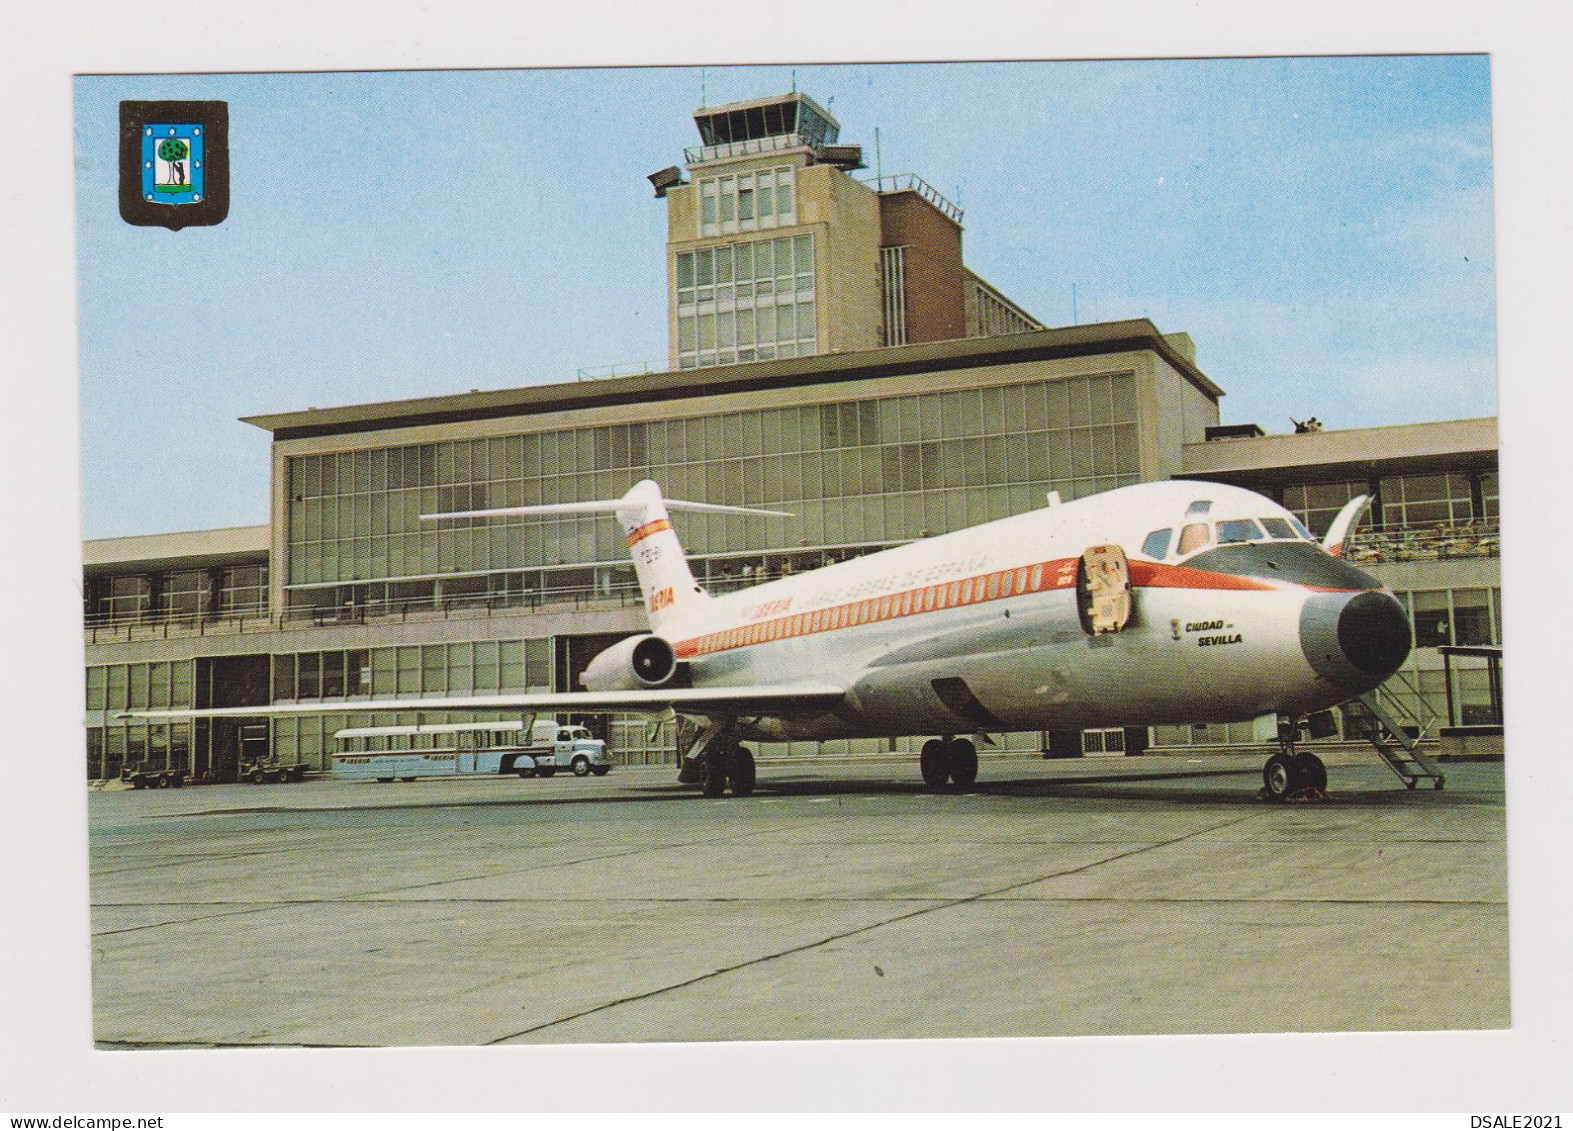 Spain MADRID "Barajas" Airport With IBERIA Carrier DC-9 Airplane, Jet, View Vintage Photo Postcard RPPc AK (734) - 1946-....: Moderne